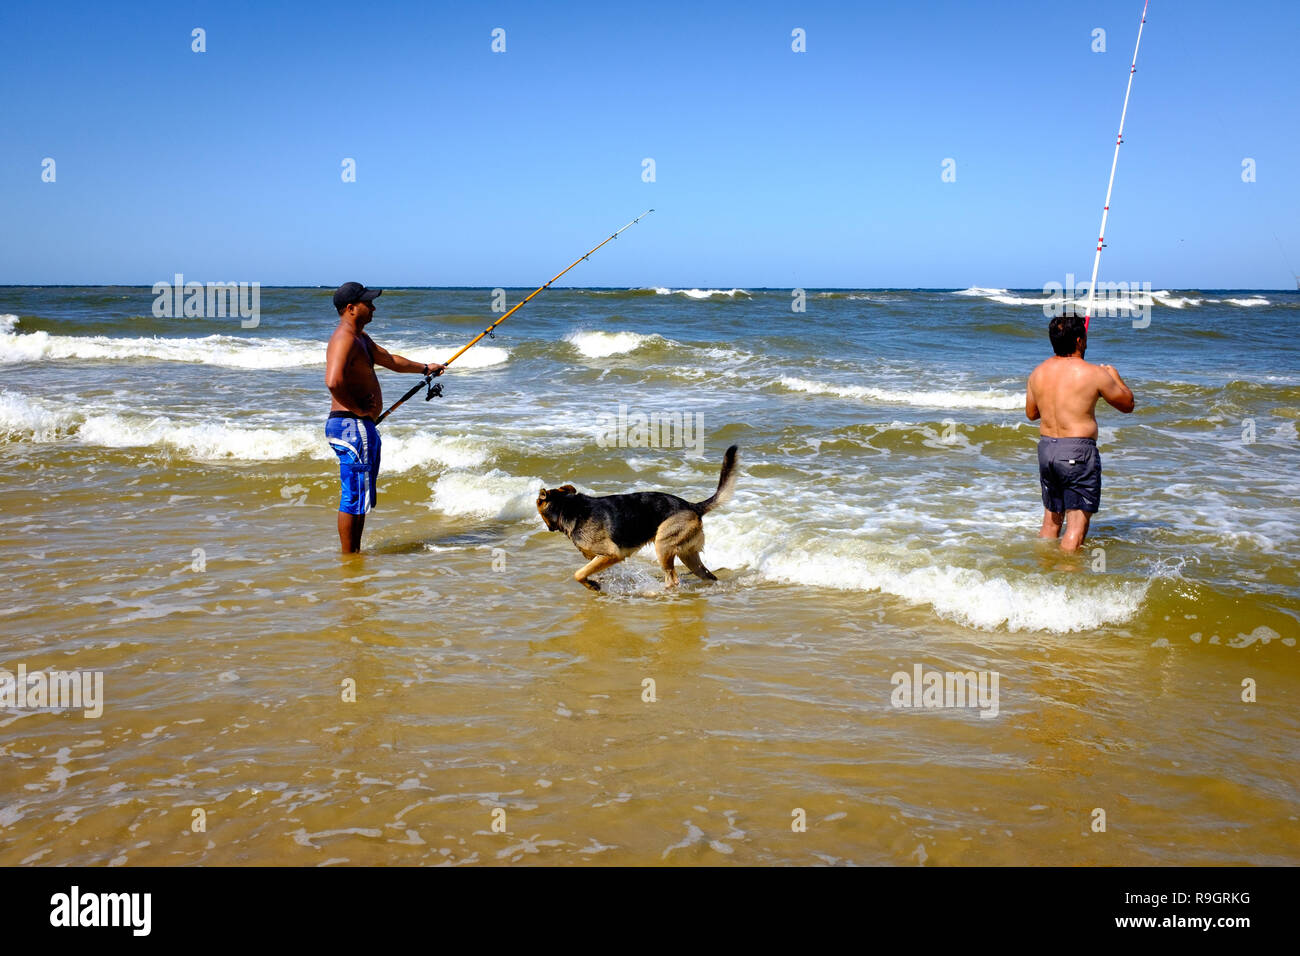 Uruguay: Uruguay, La Floresta, small city and resort on the Costa de Oro (Golden Coast). Two anglers and their dog (a German shepherd) in the waves. Stock Photo